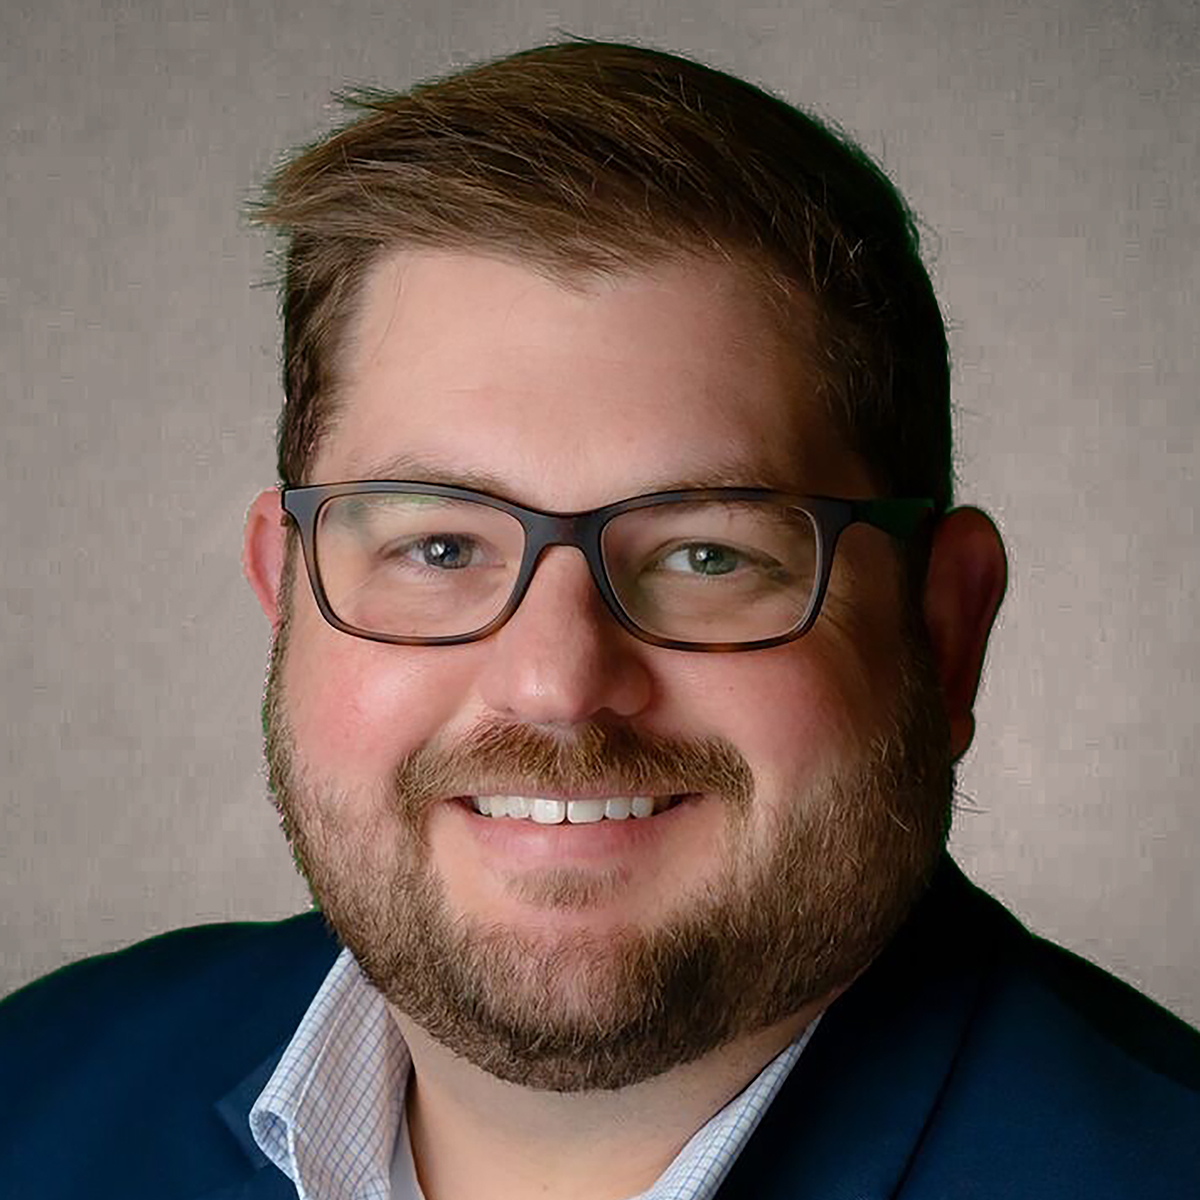 Bergstrom Inc. appoints Jeremy Byrd Business Development Manager for Bergstrom Commercial Accounts